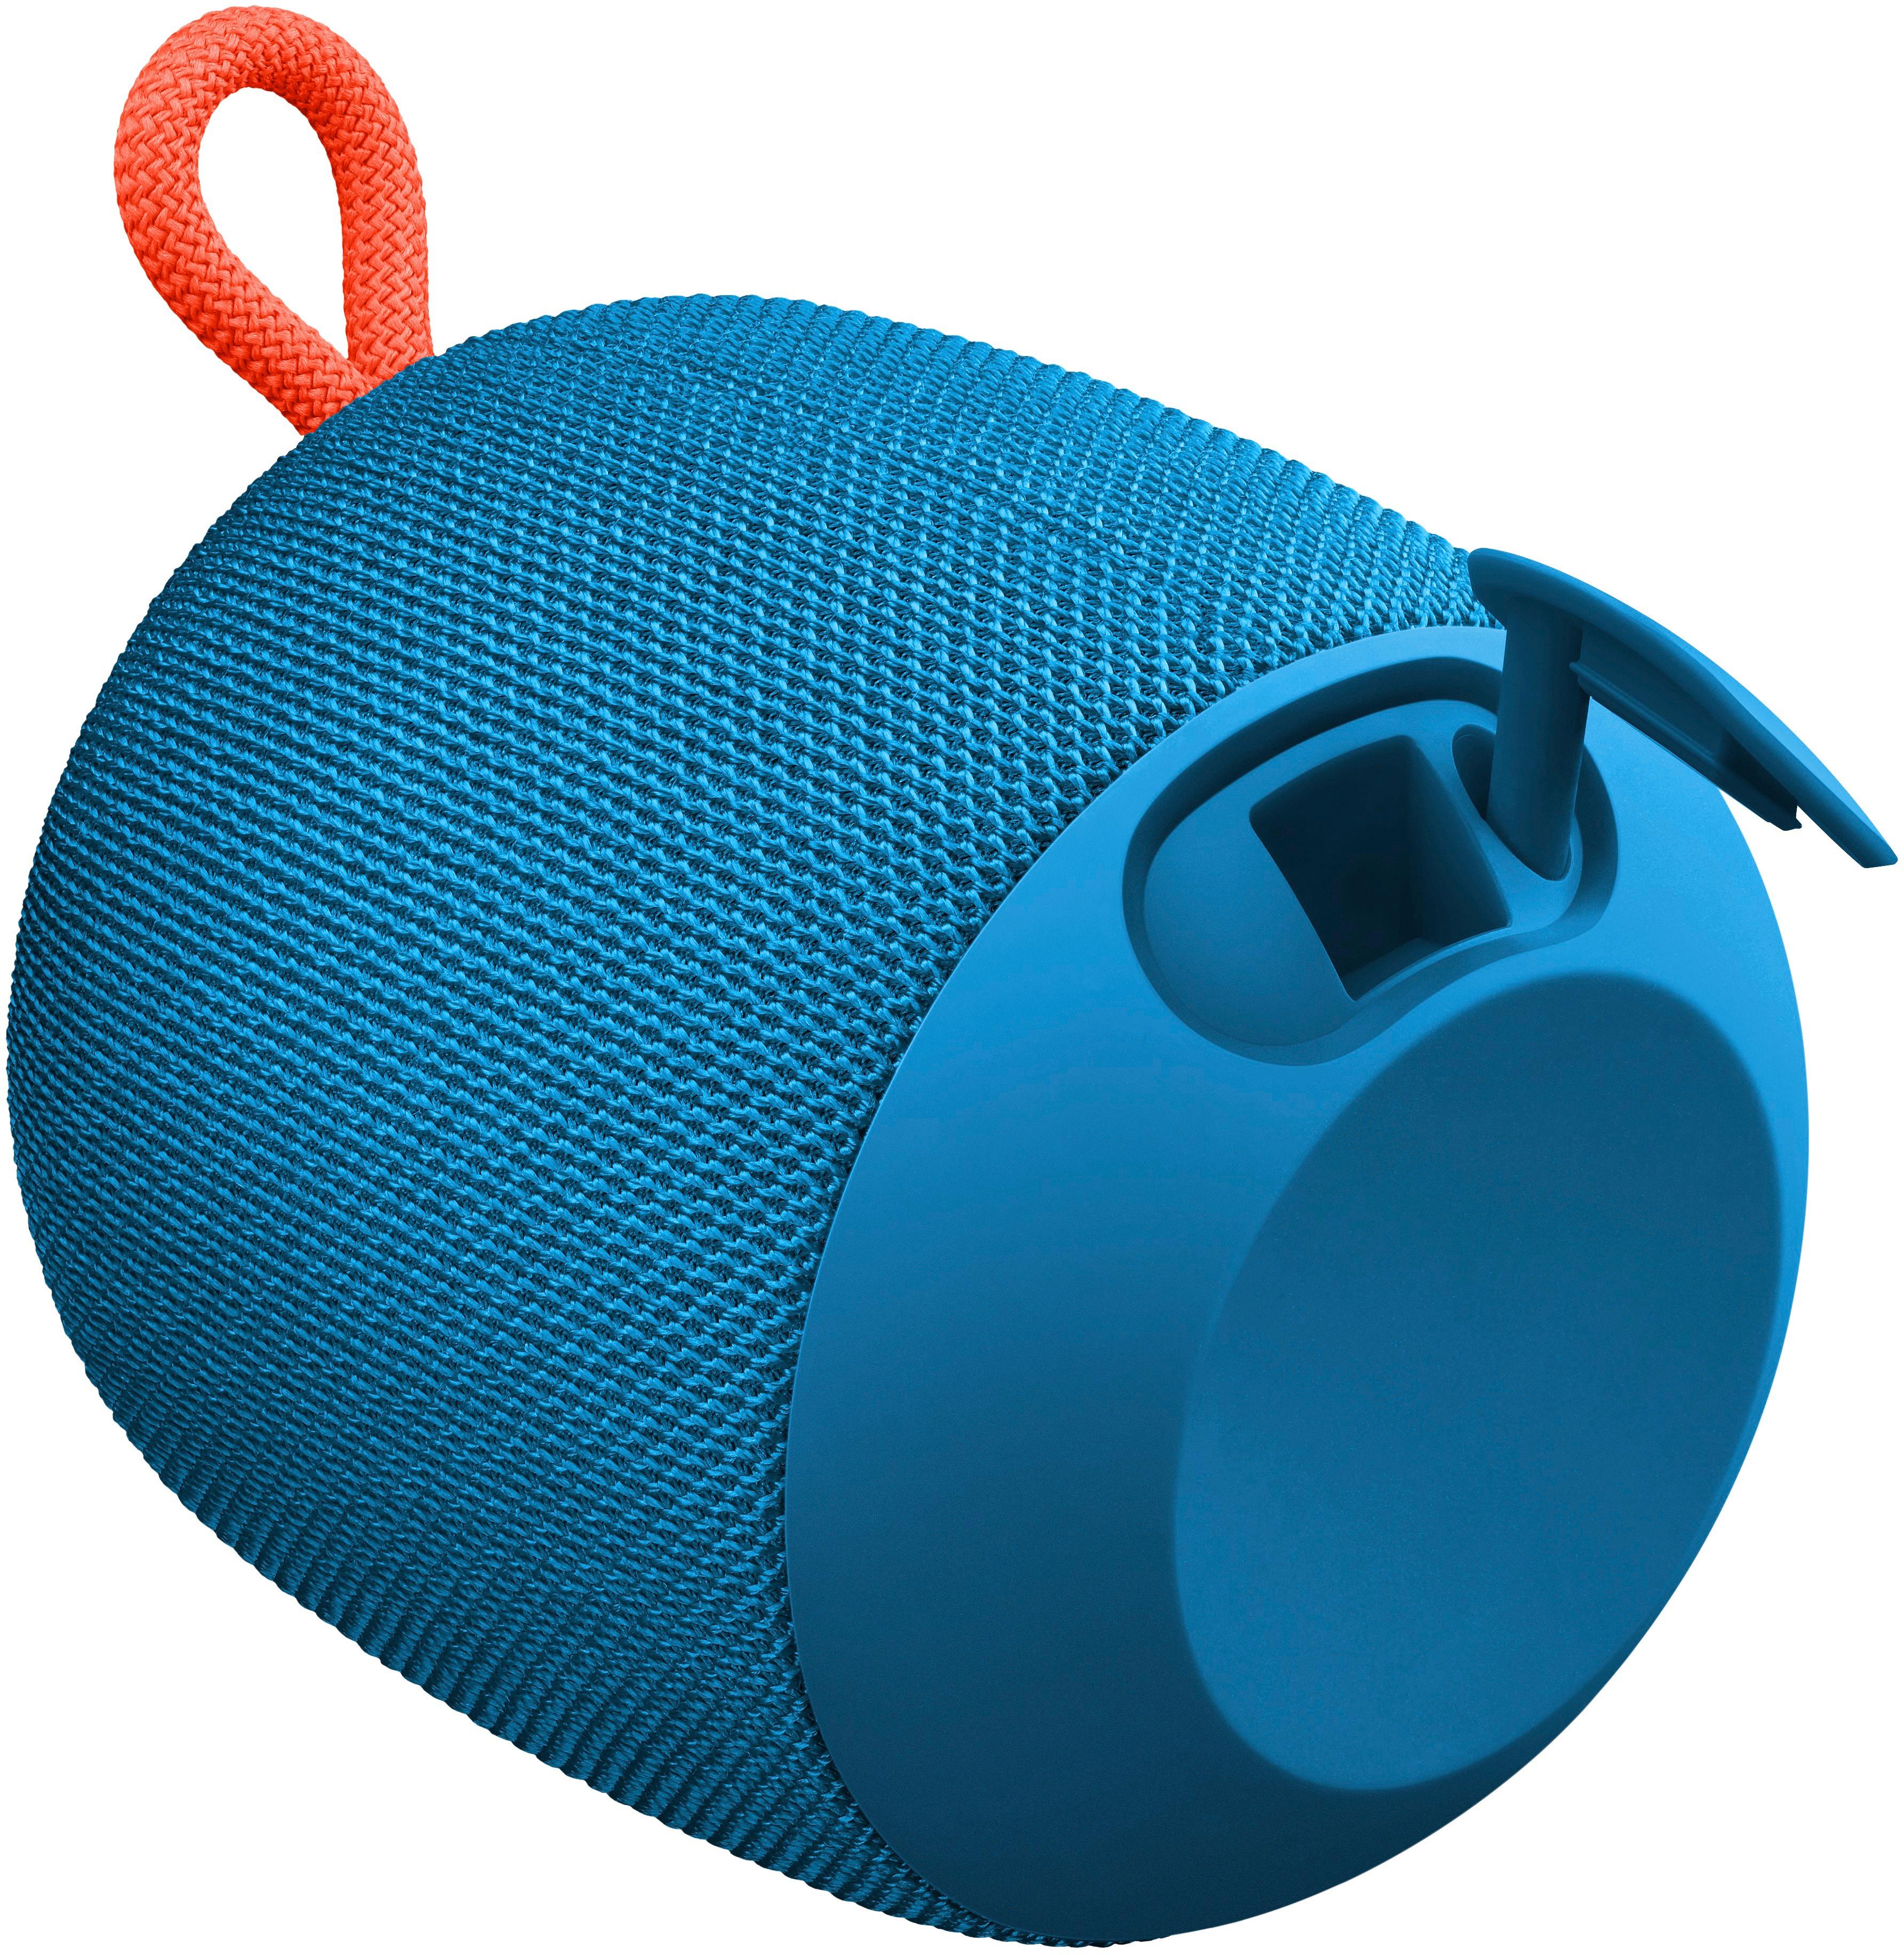 Ultimate Ears Wonderboom 3 review: stylish bluetooth speaker sounds good –  Droid News